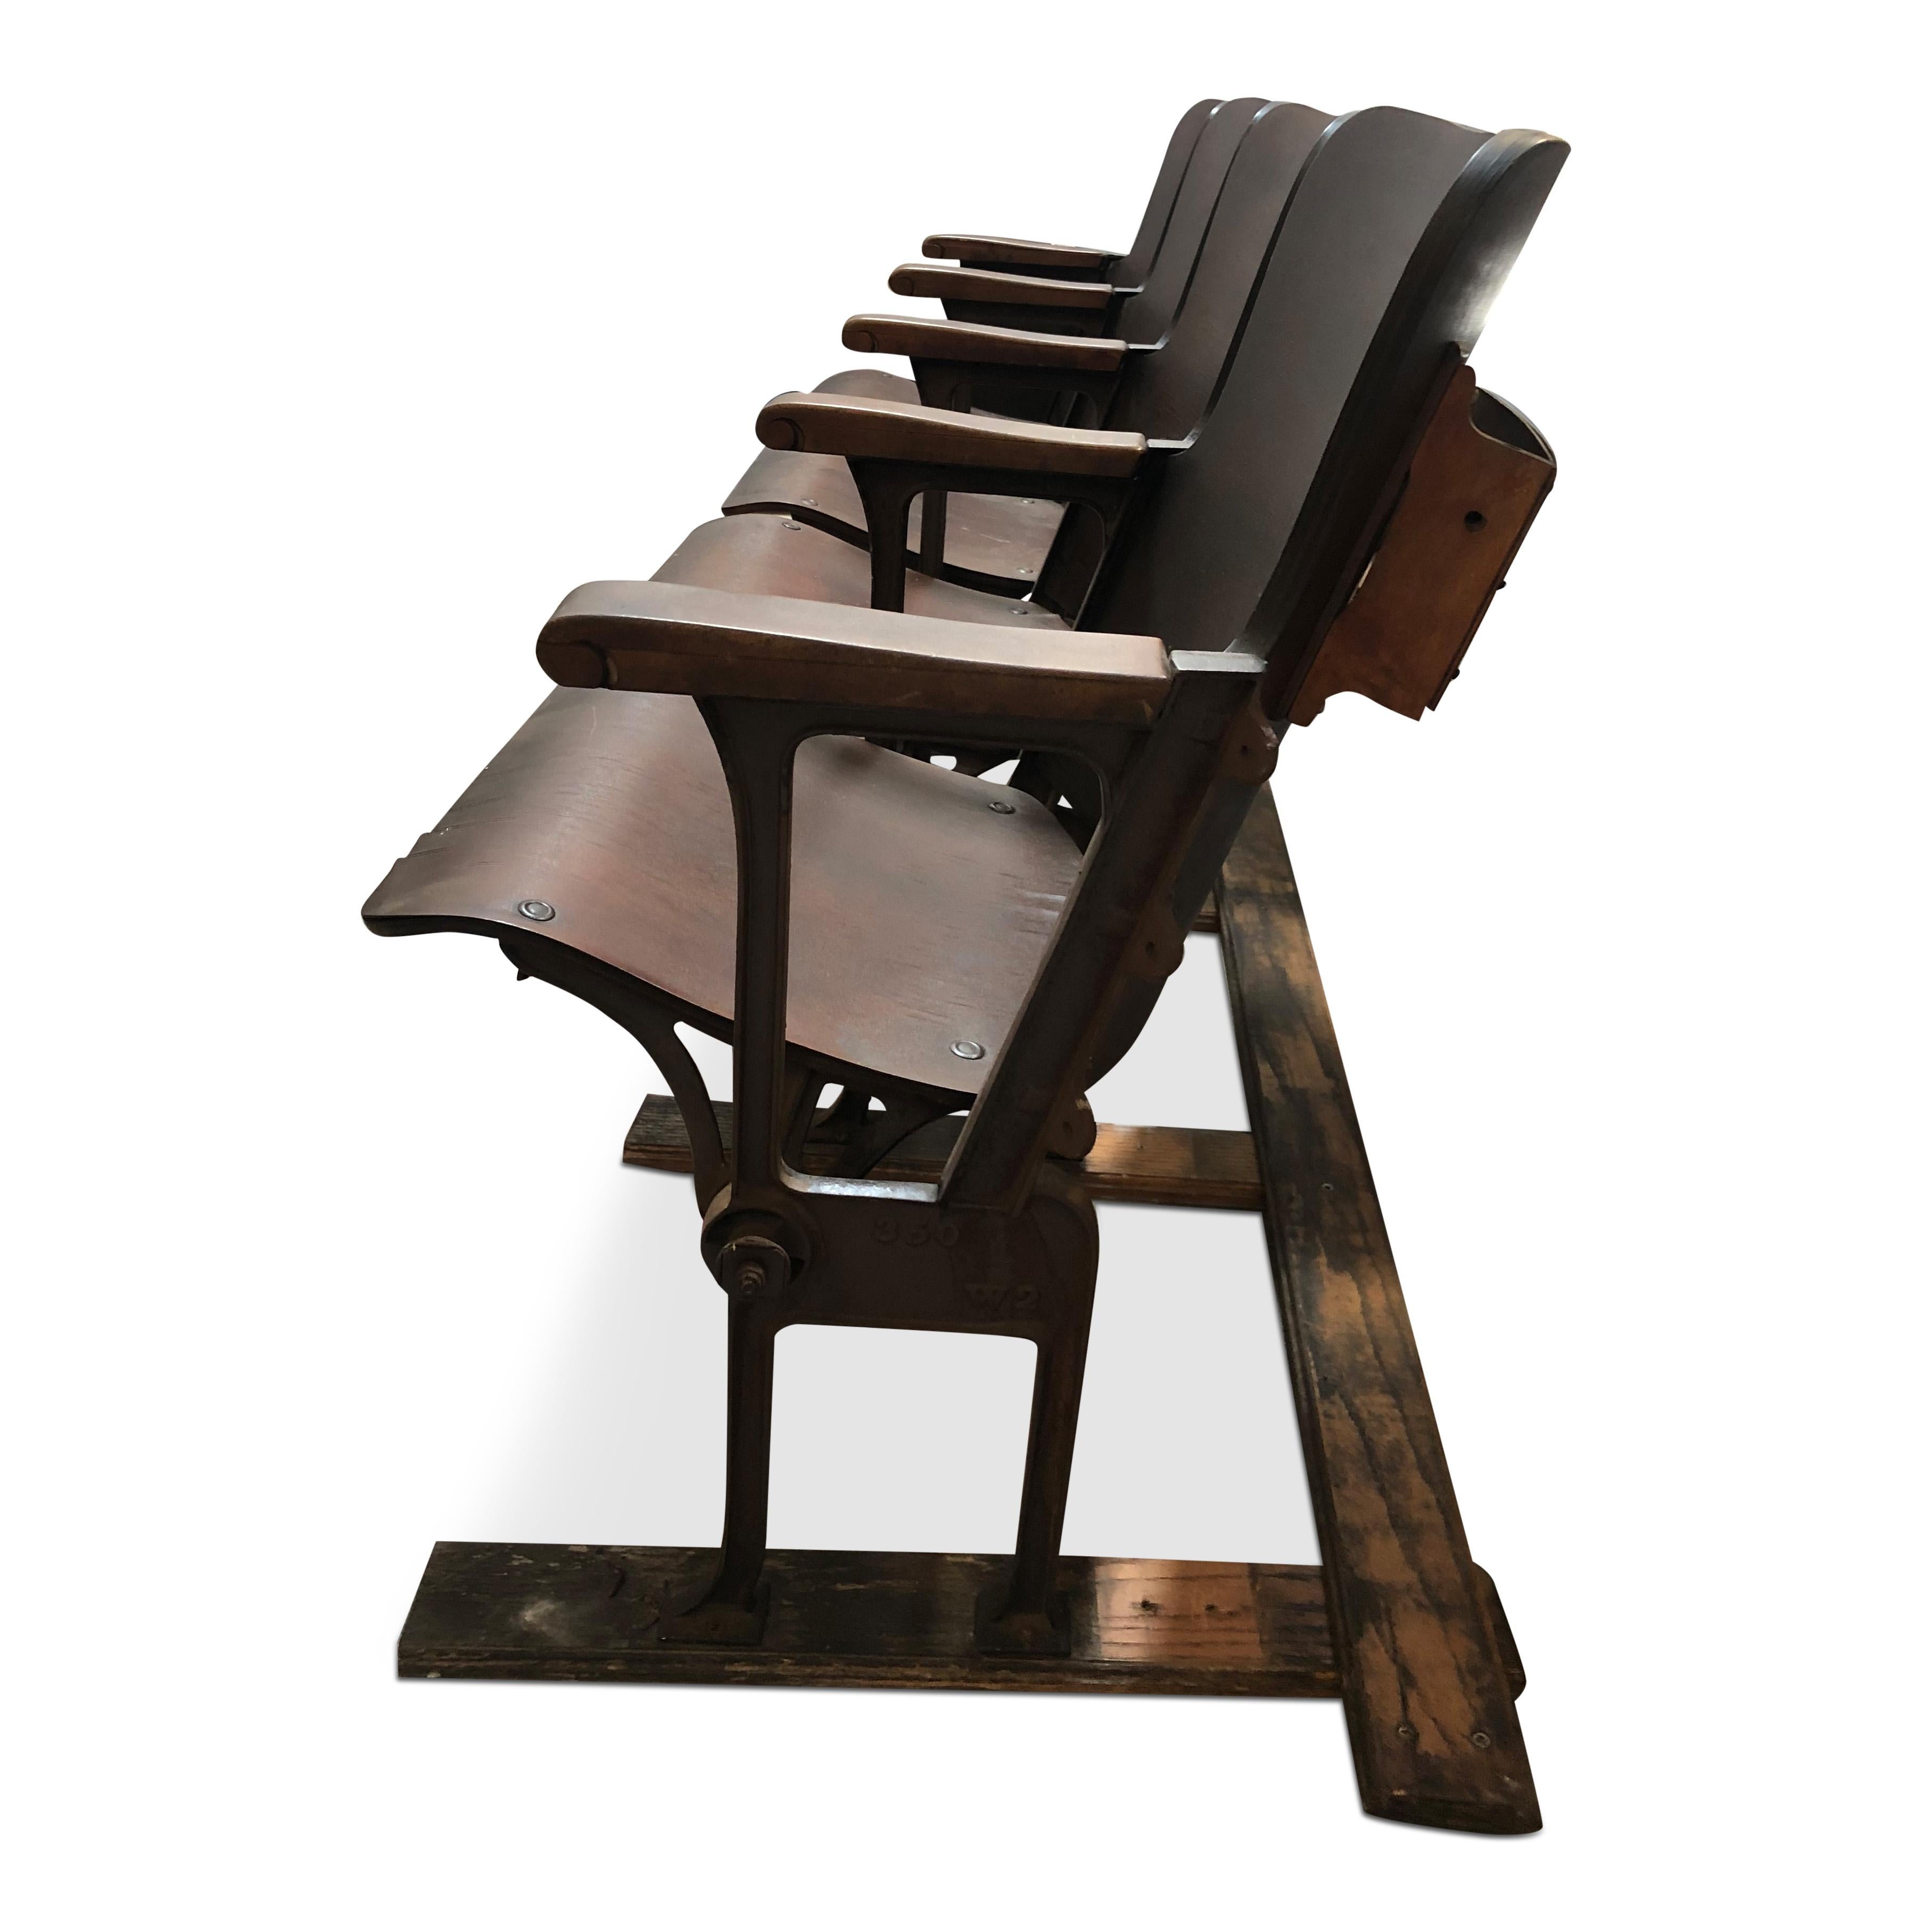 These industrial styled theater seats are made out of bent plywood and the arm rests are solid wood. The structure and seat mechanism is made out of steel. Seats can be folded up and the base can be either removed or attached to the ground for